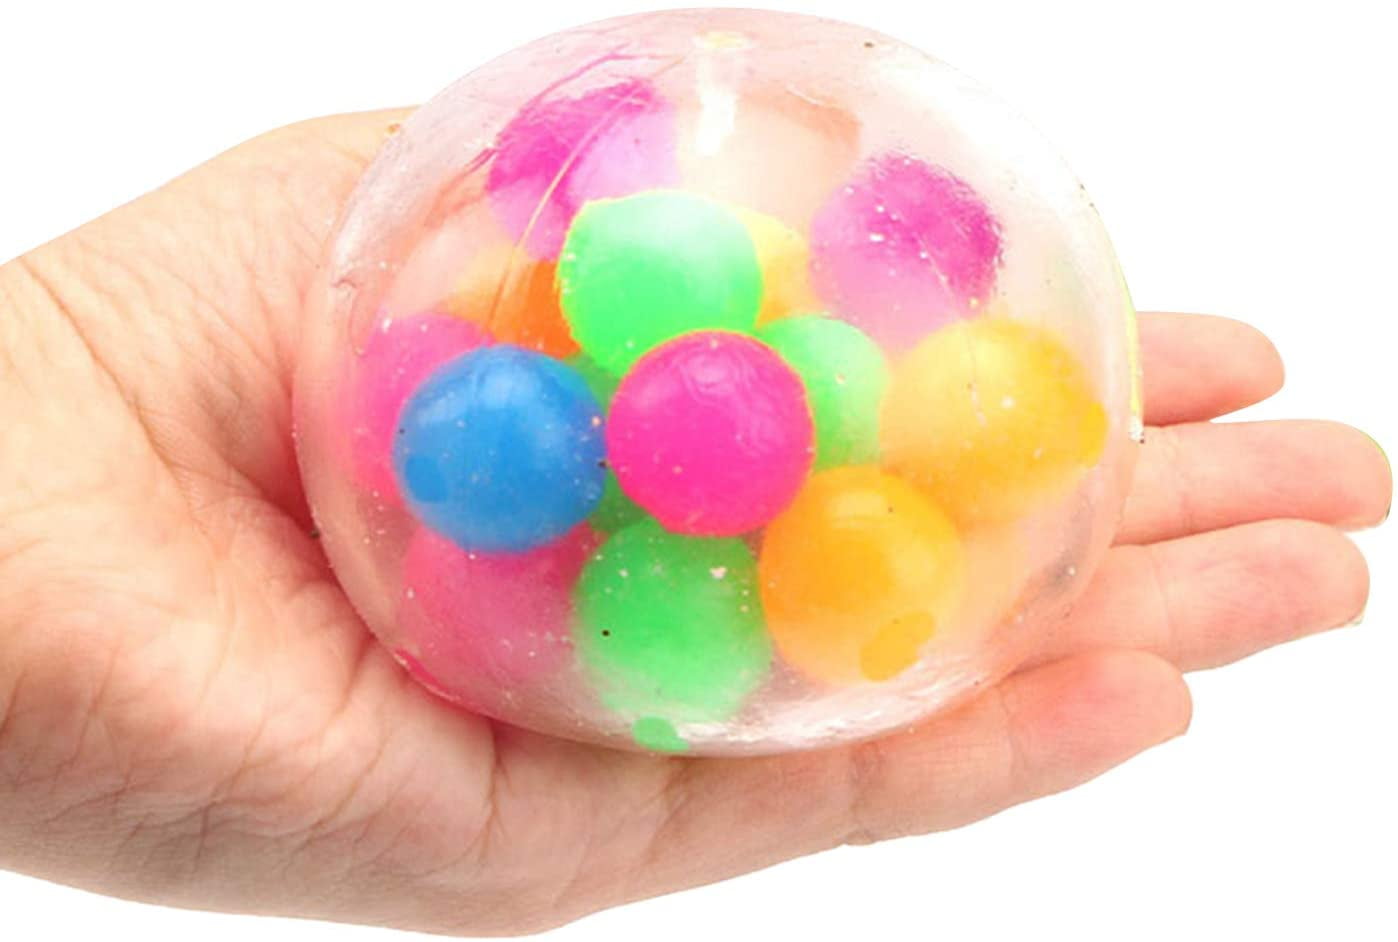 Details about   Rainbow Ball Stress Ball Squeeze Relief Novelty Squishy Soft Funny Joke Toy Hot 